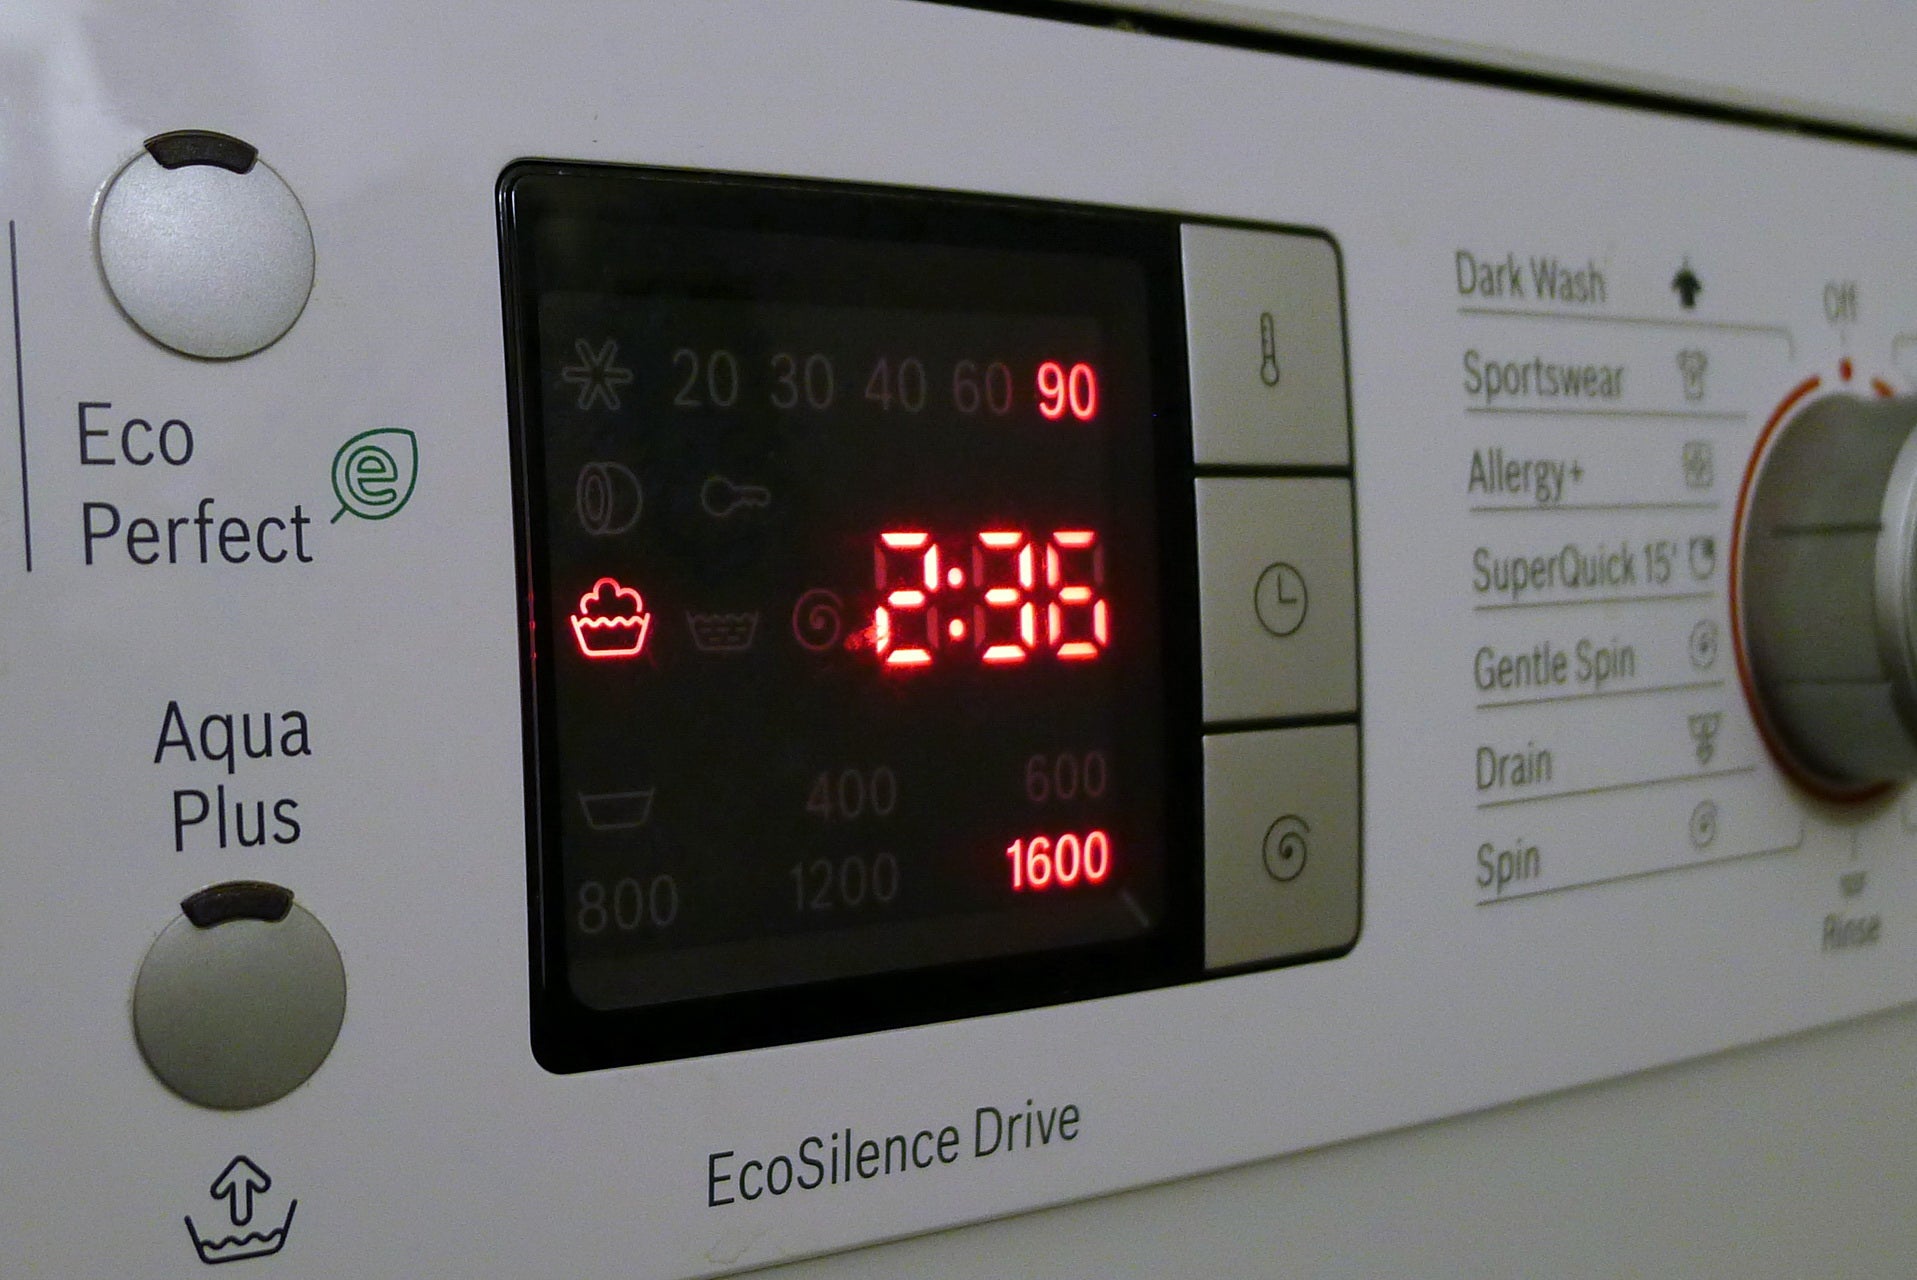 A washing machine control panel showing it's on a boil wash